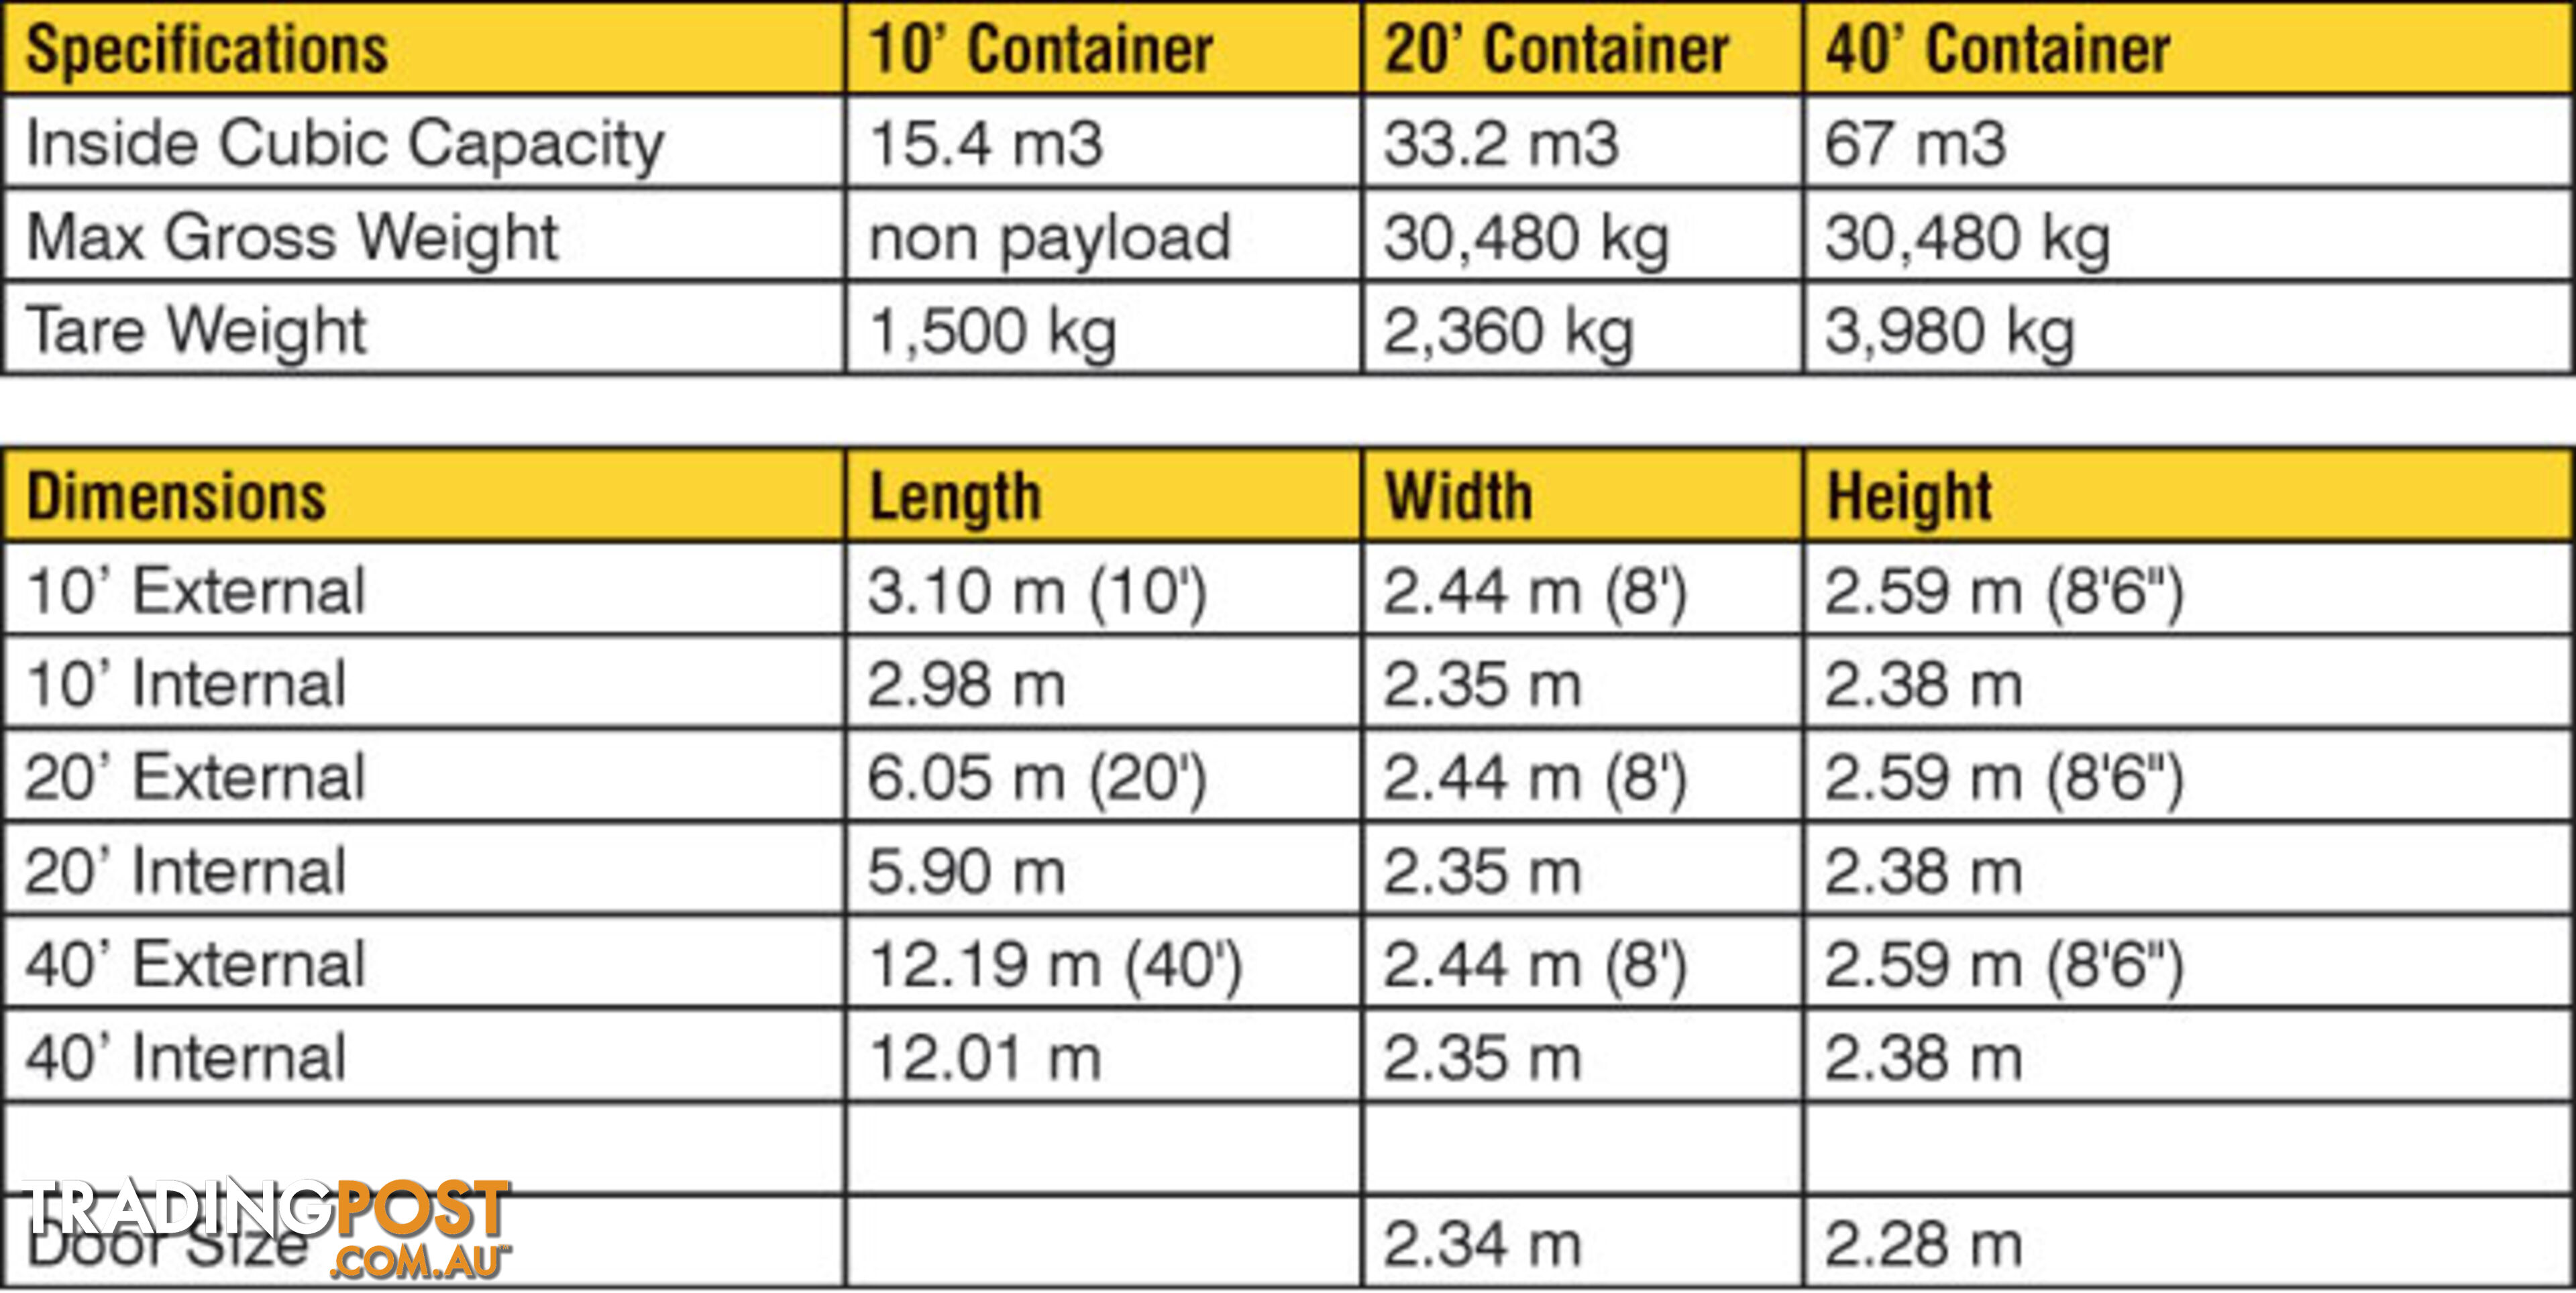 New 20ft Shipping Containers Kalgoorlie - From $5990 + GST